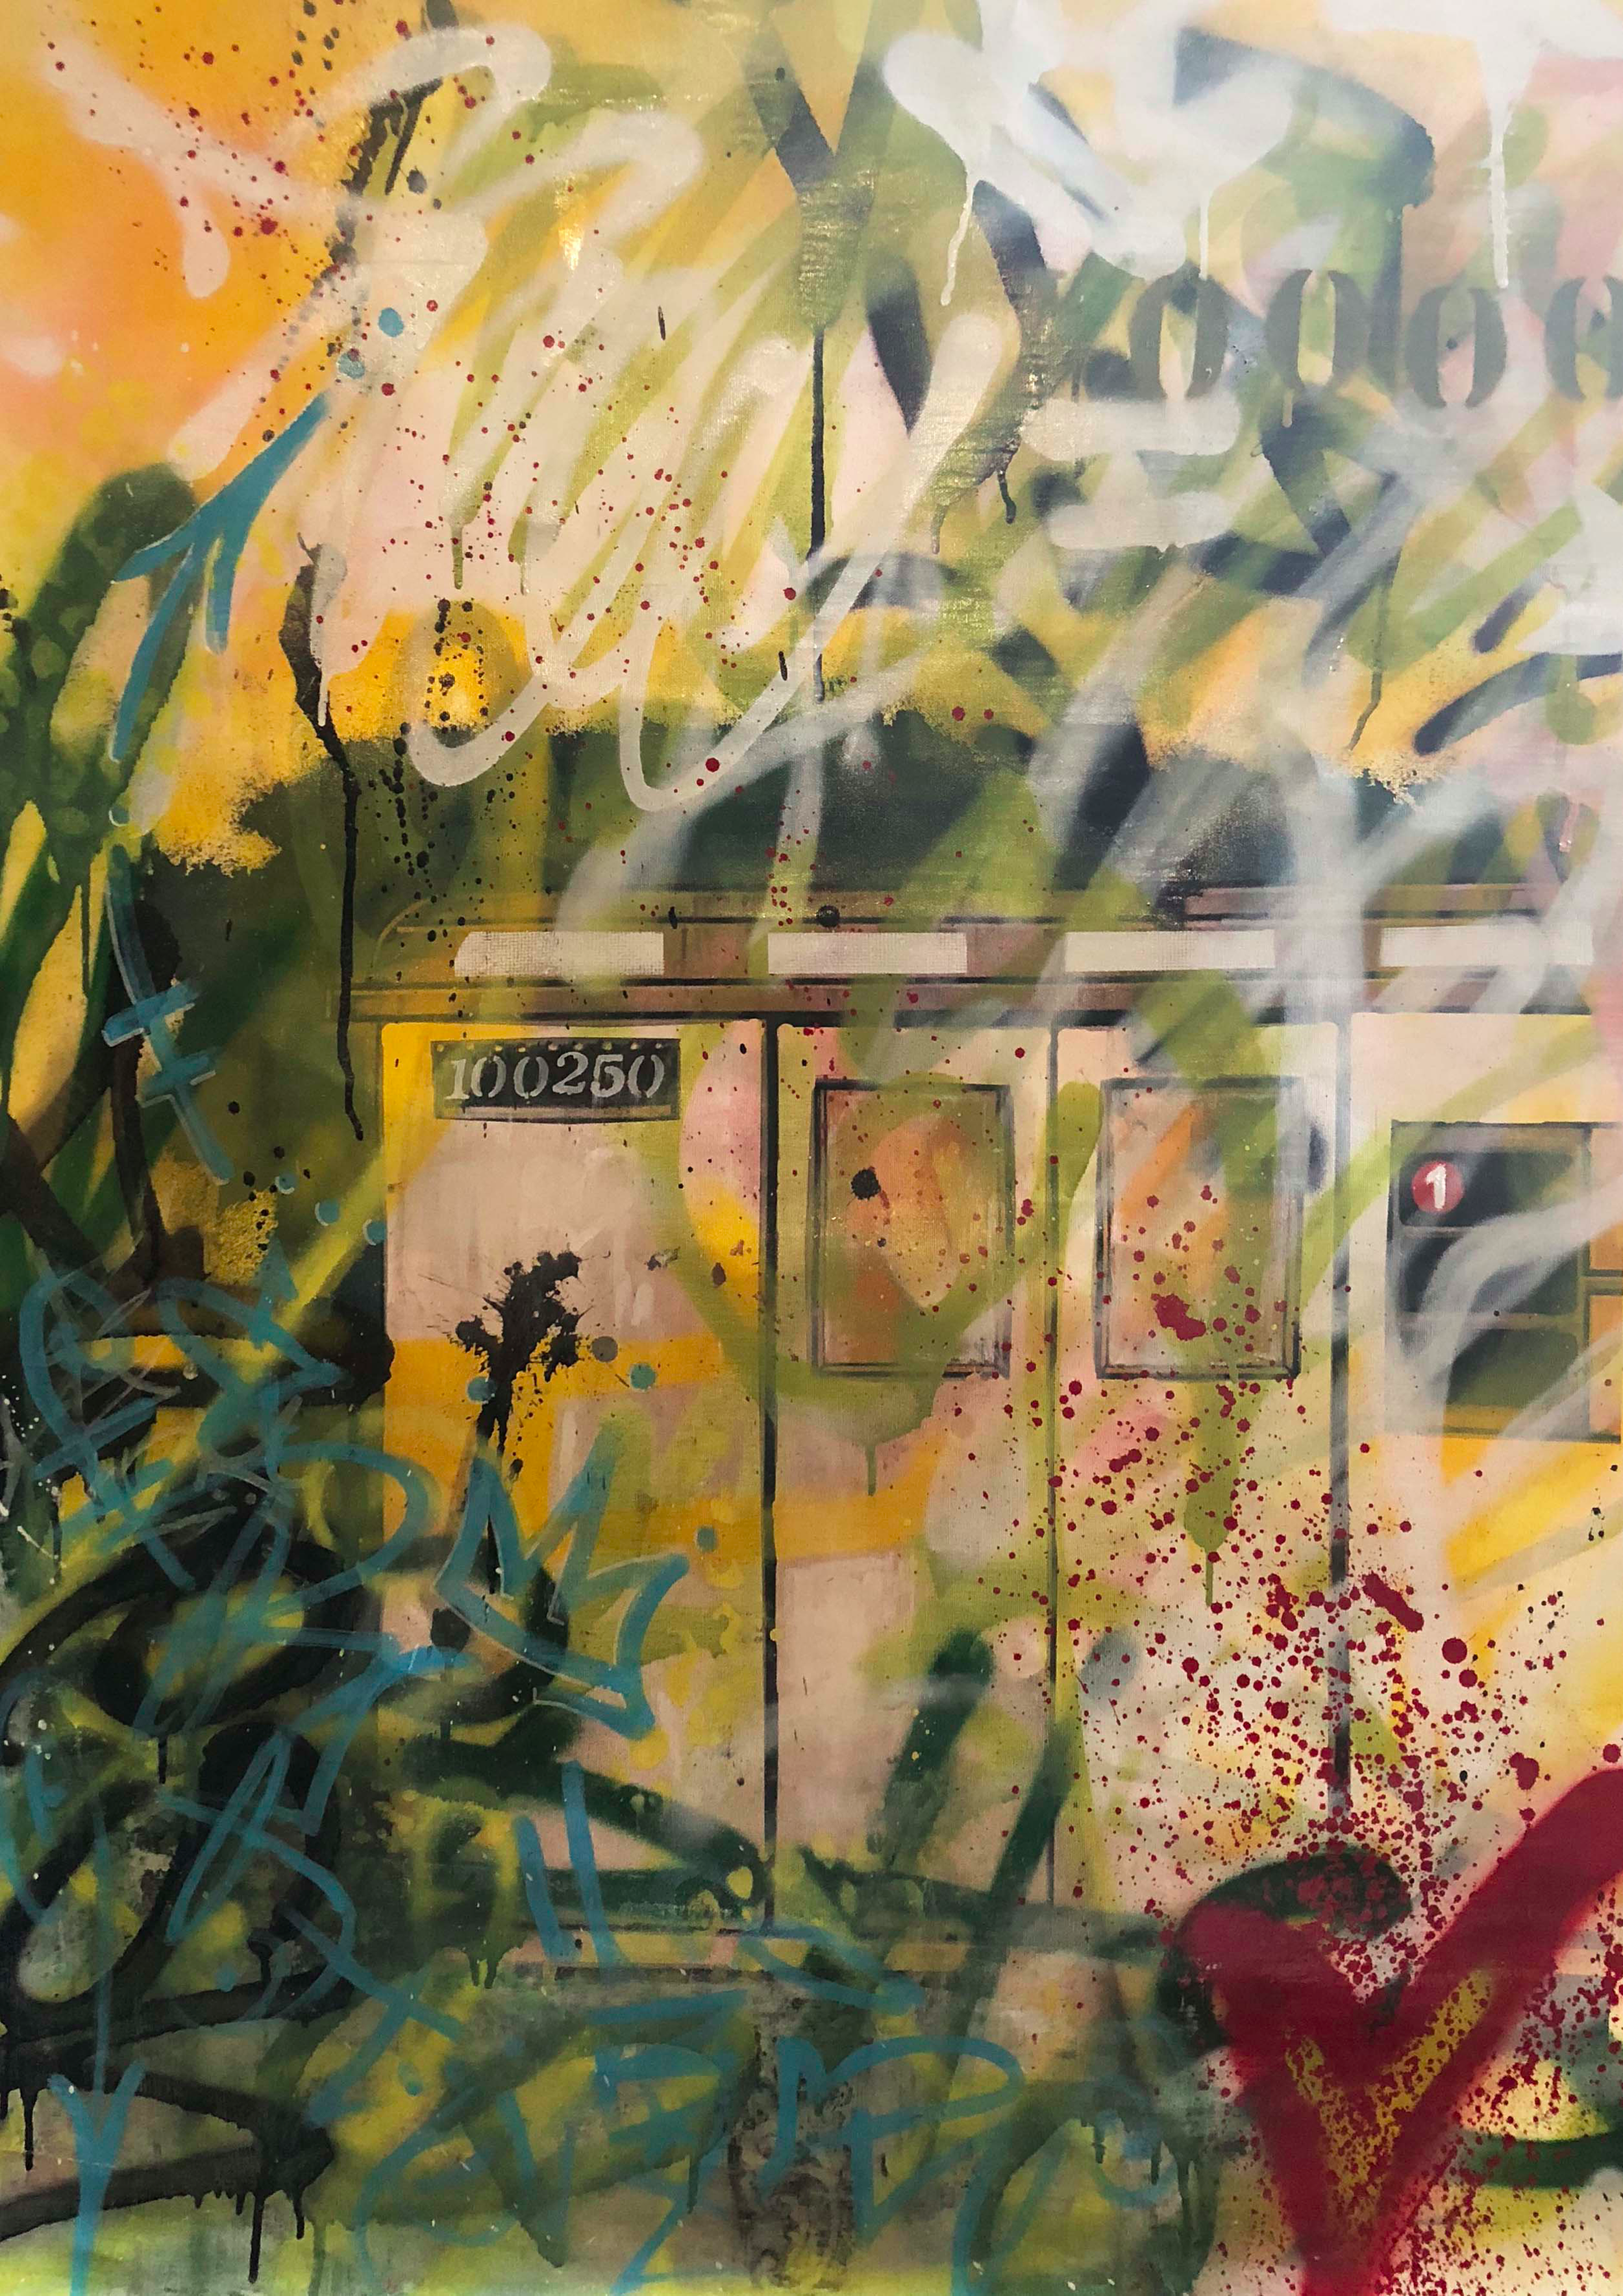  Urban Love Story: The 1 that got away, 30”x40”, 2018. Exclusively at Galerie d’Orsay, Boston 